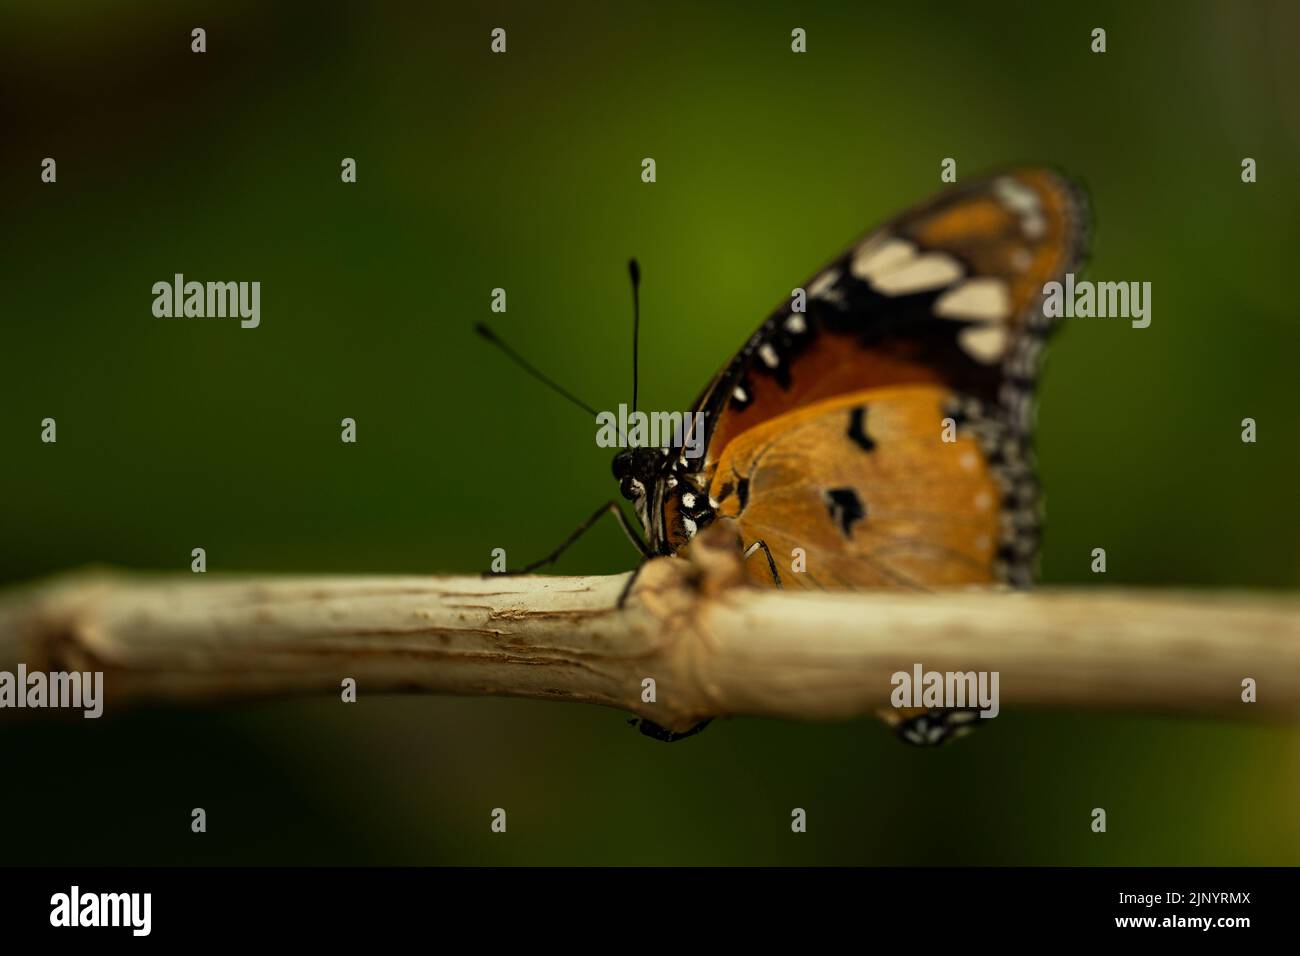 A plain tiger butterfly perched on a twig. Stock Photo